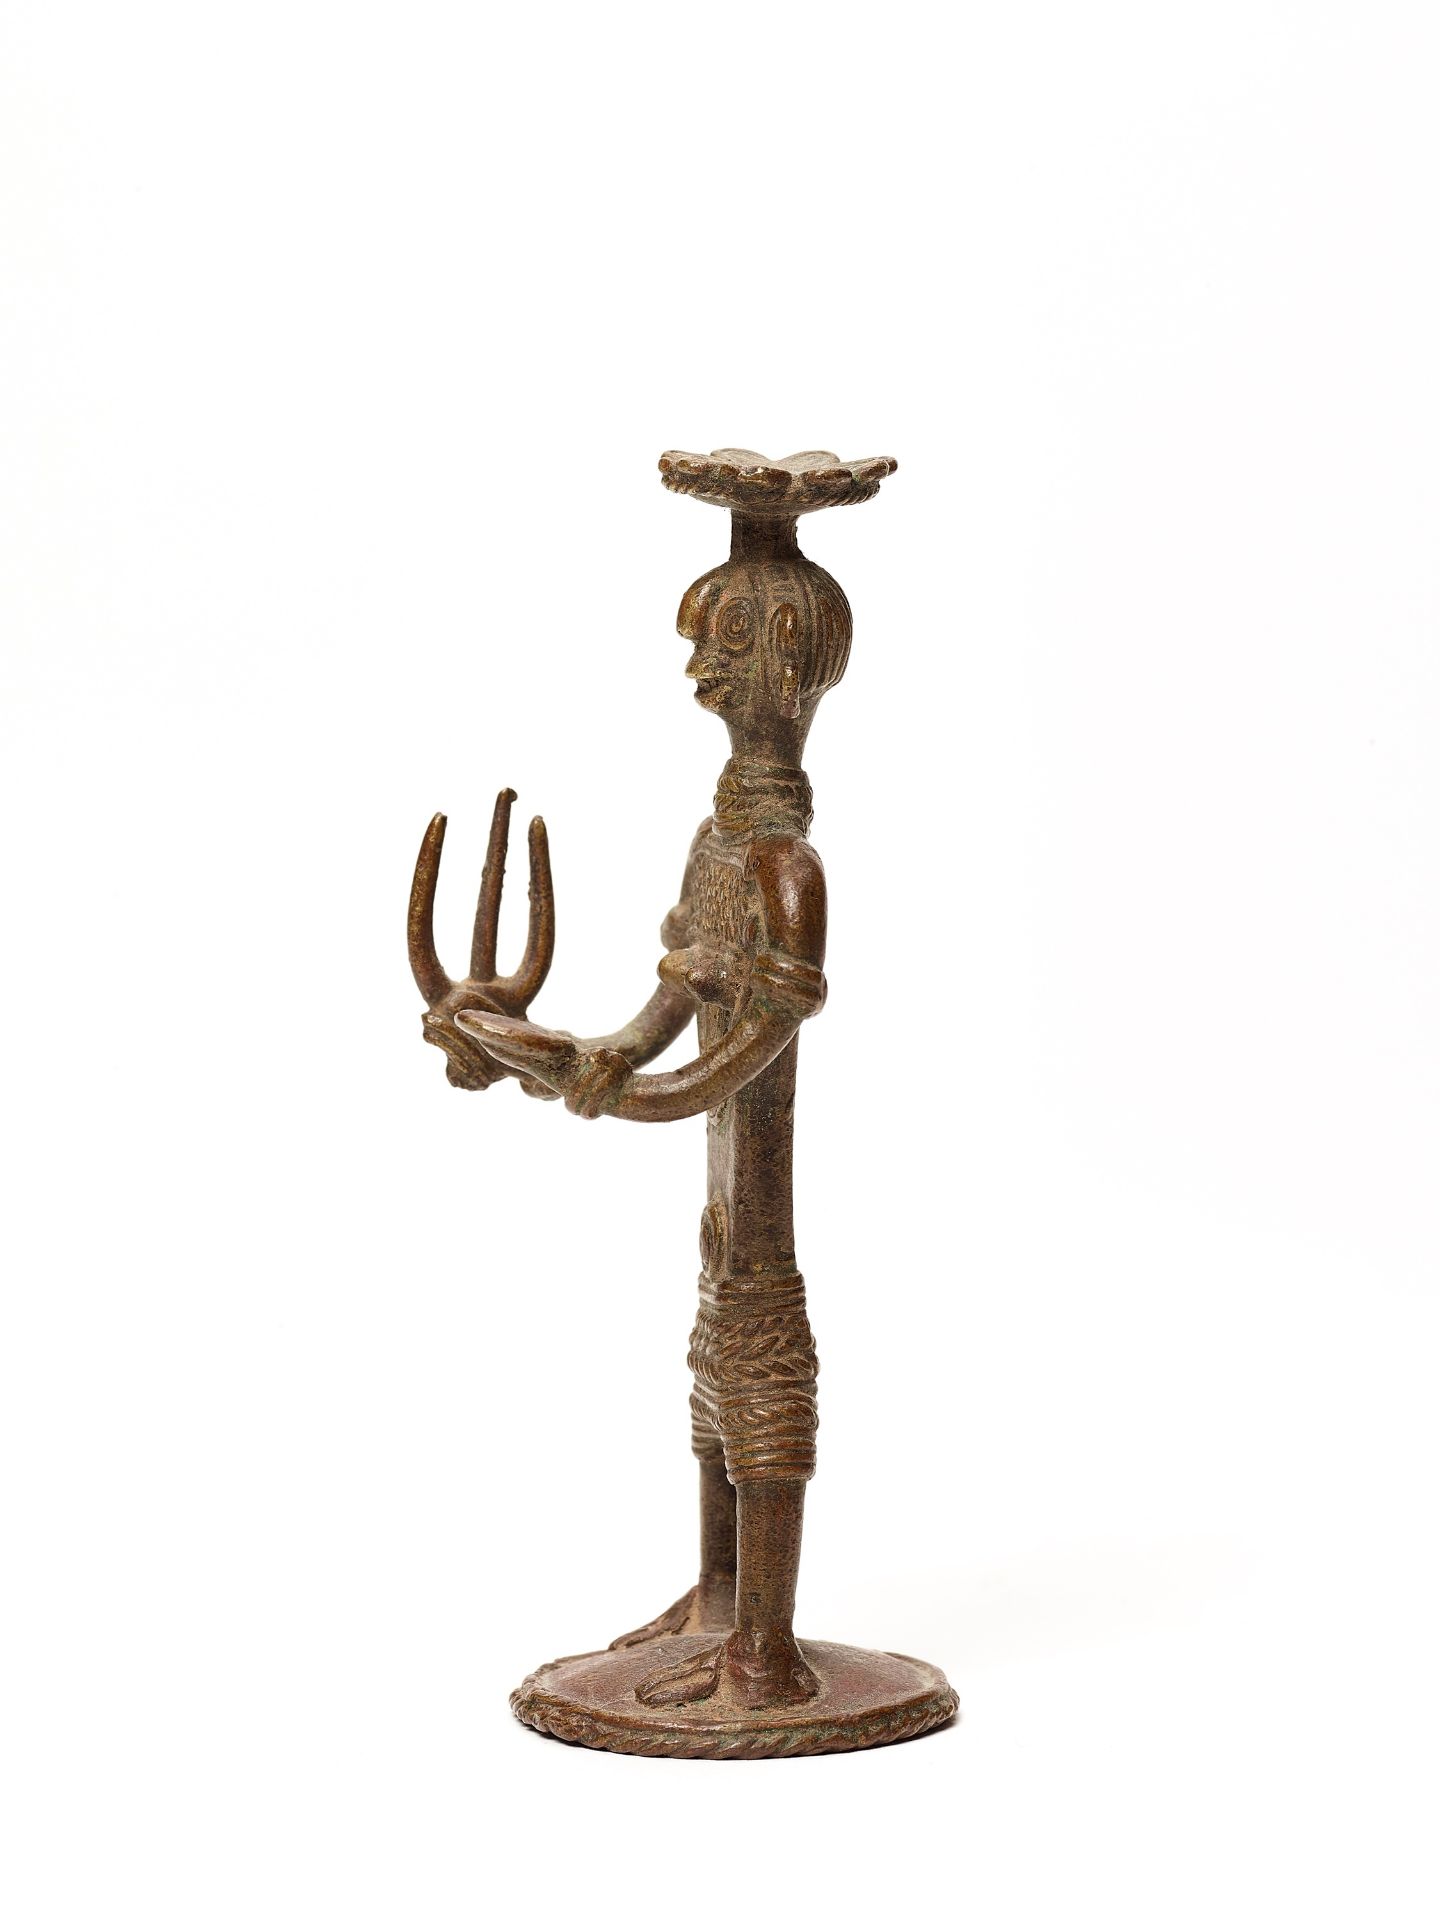 A BASTAR BRONZE OF A FEMALE DEITY WITH TRIDENT AND KHAPPAR - Image 3 of 4